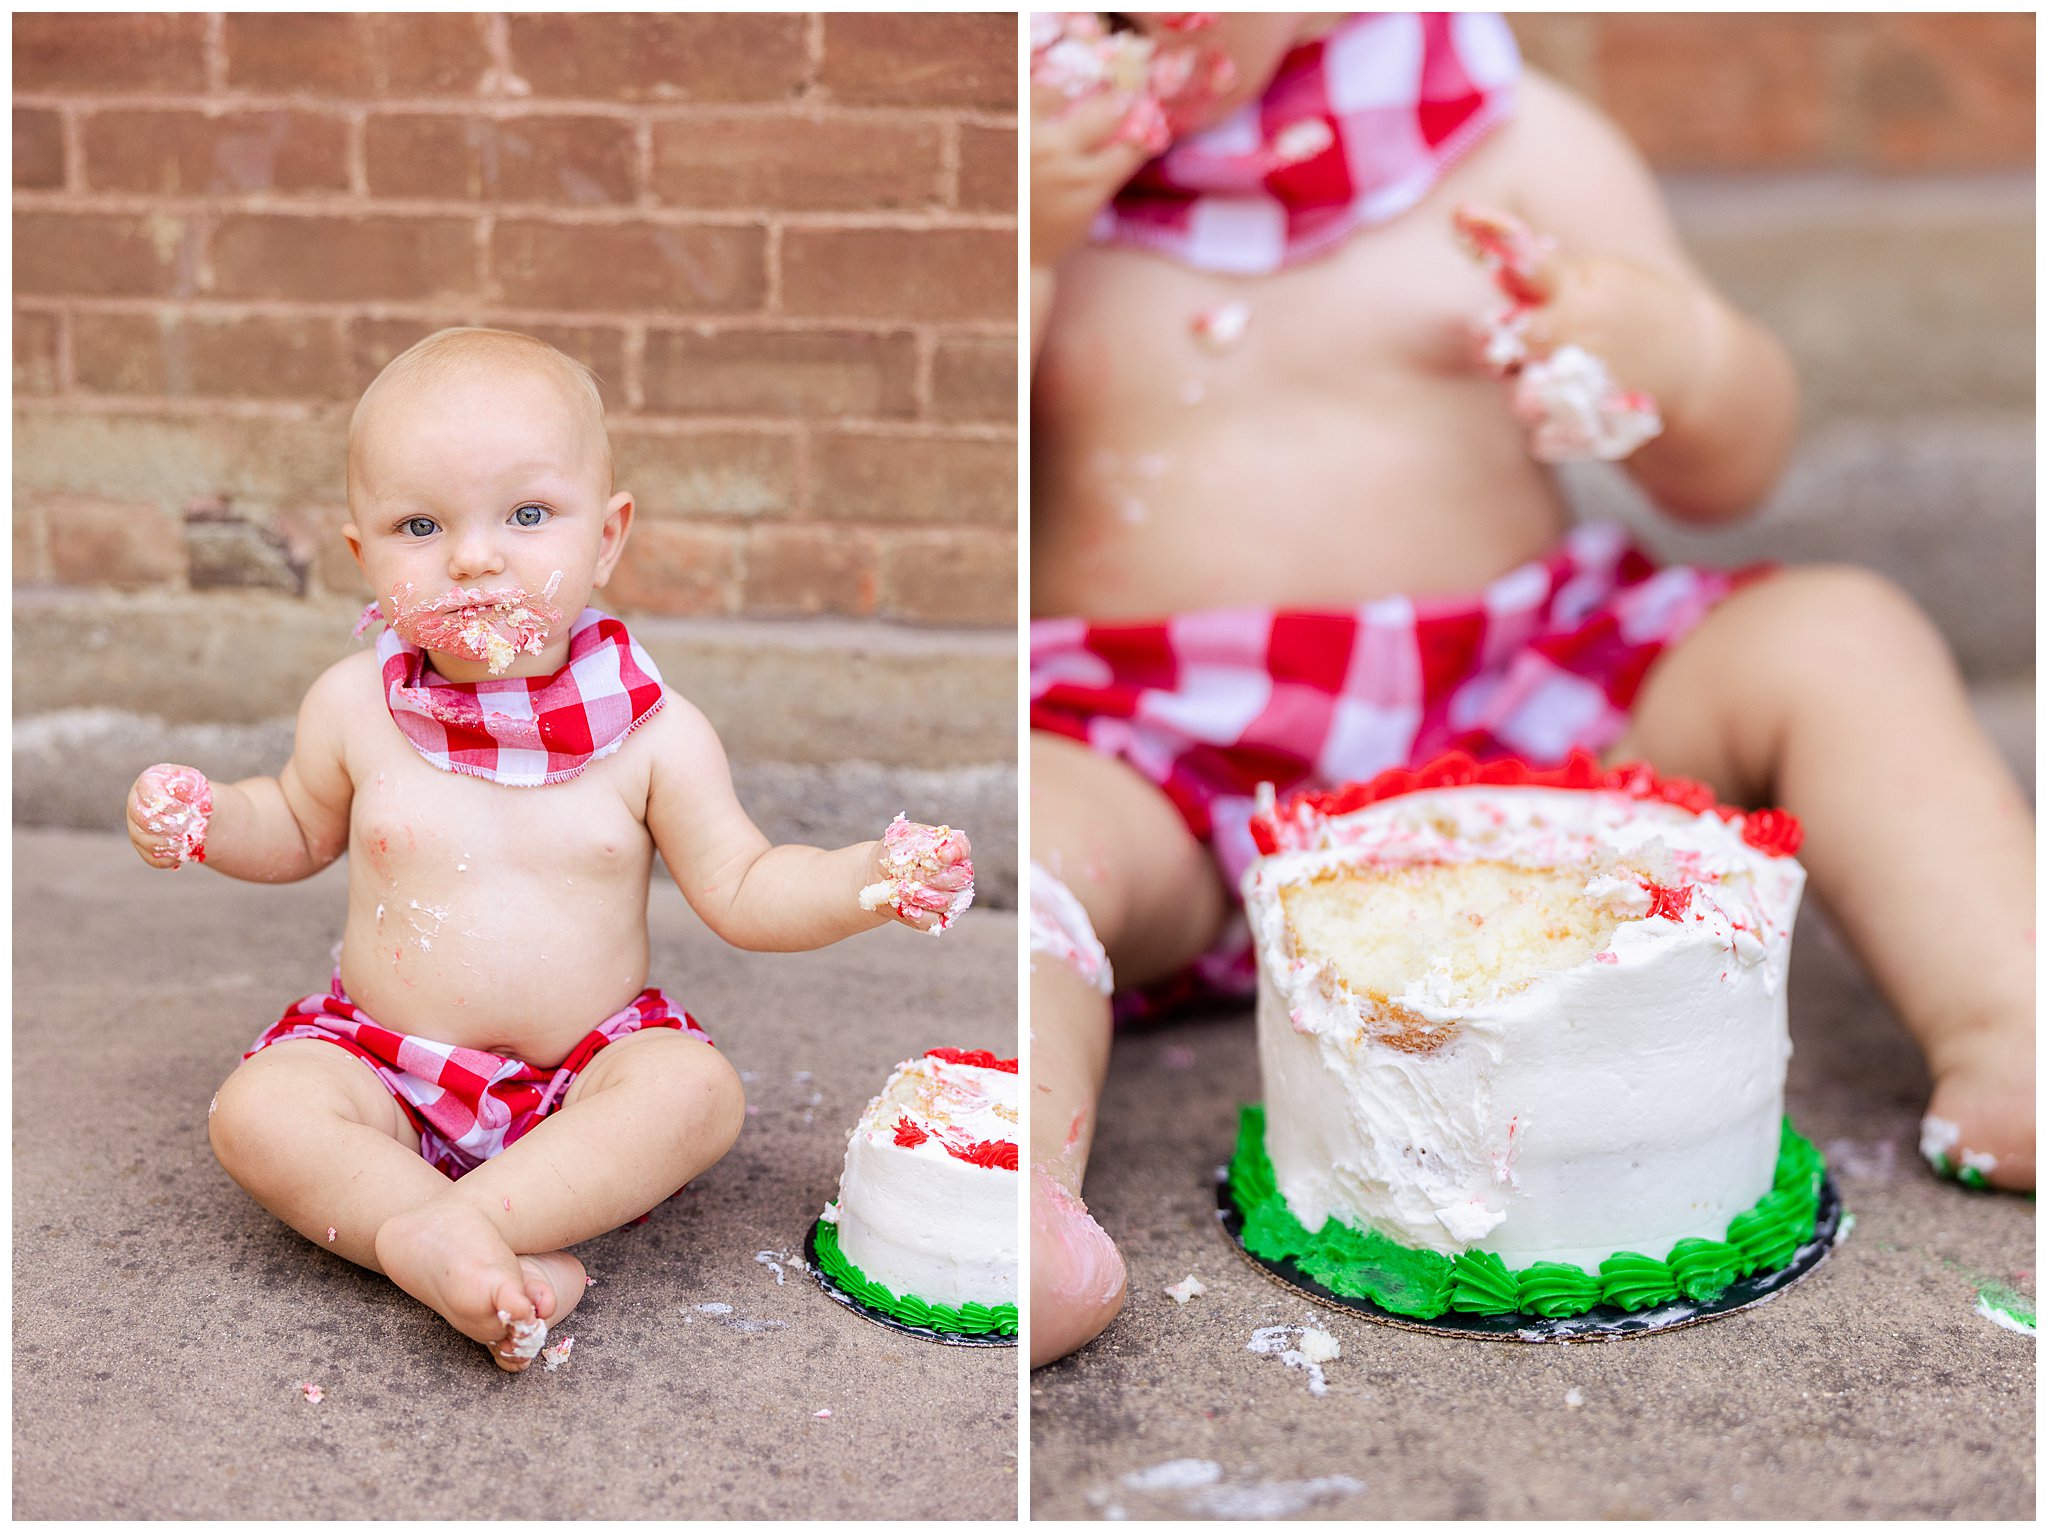 One Year Old Cake Smash Session Pizza Chef Costume Hat Chico CA Summer July,